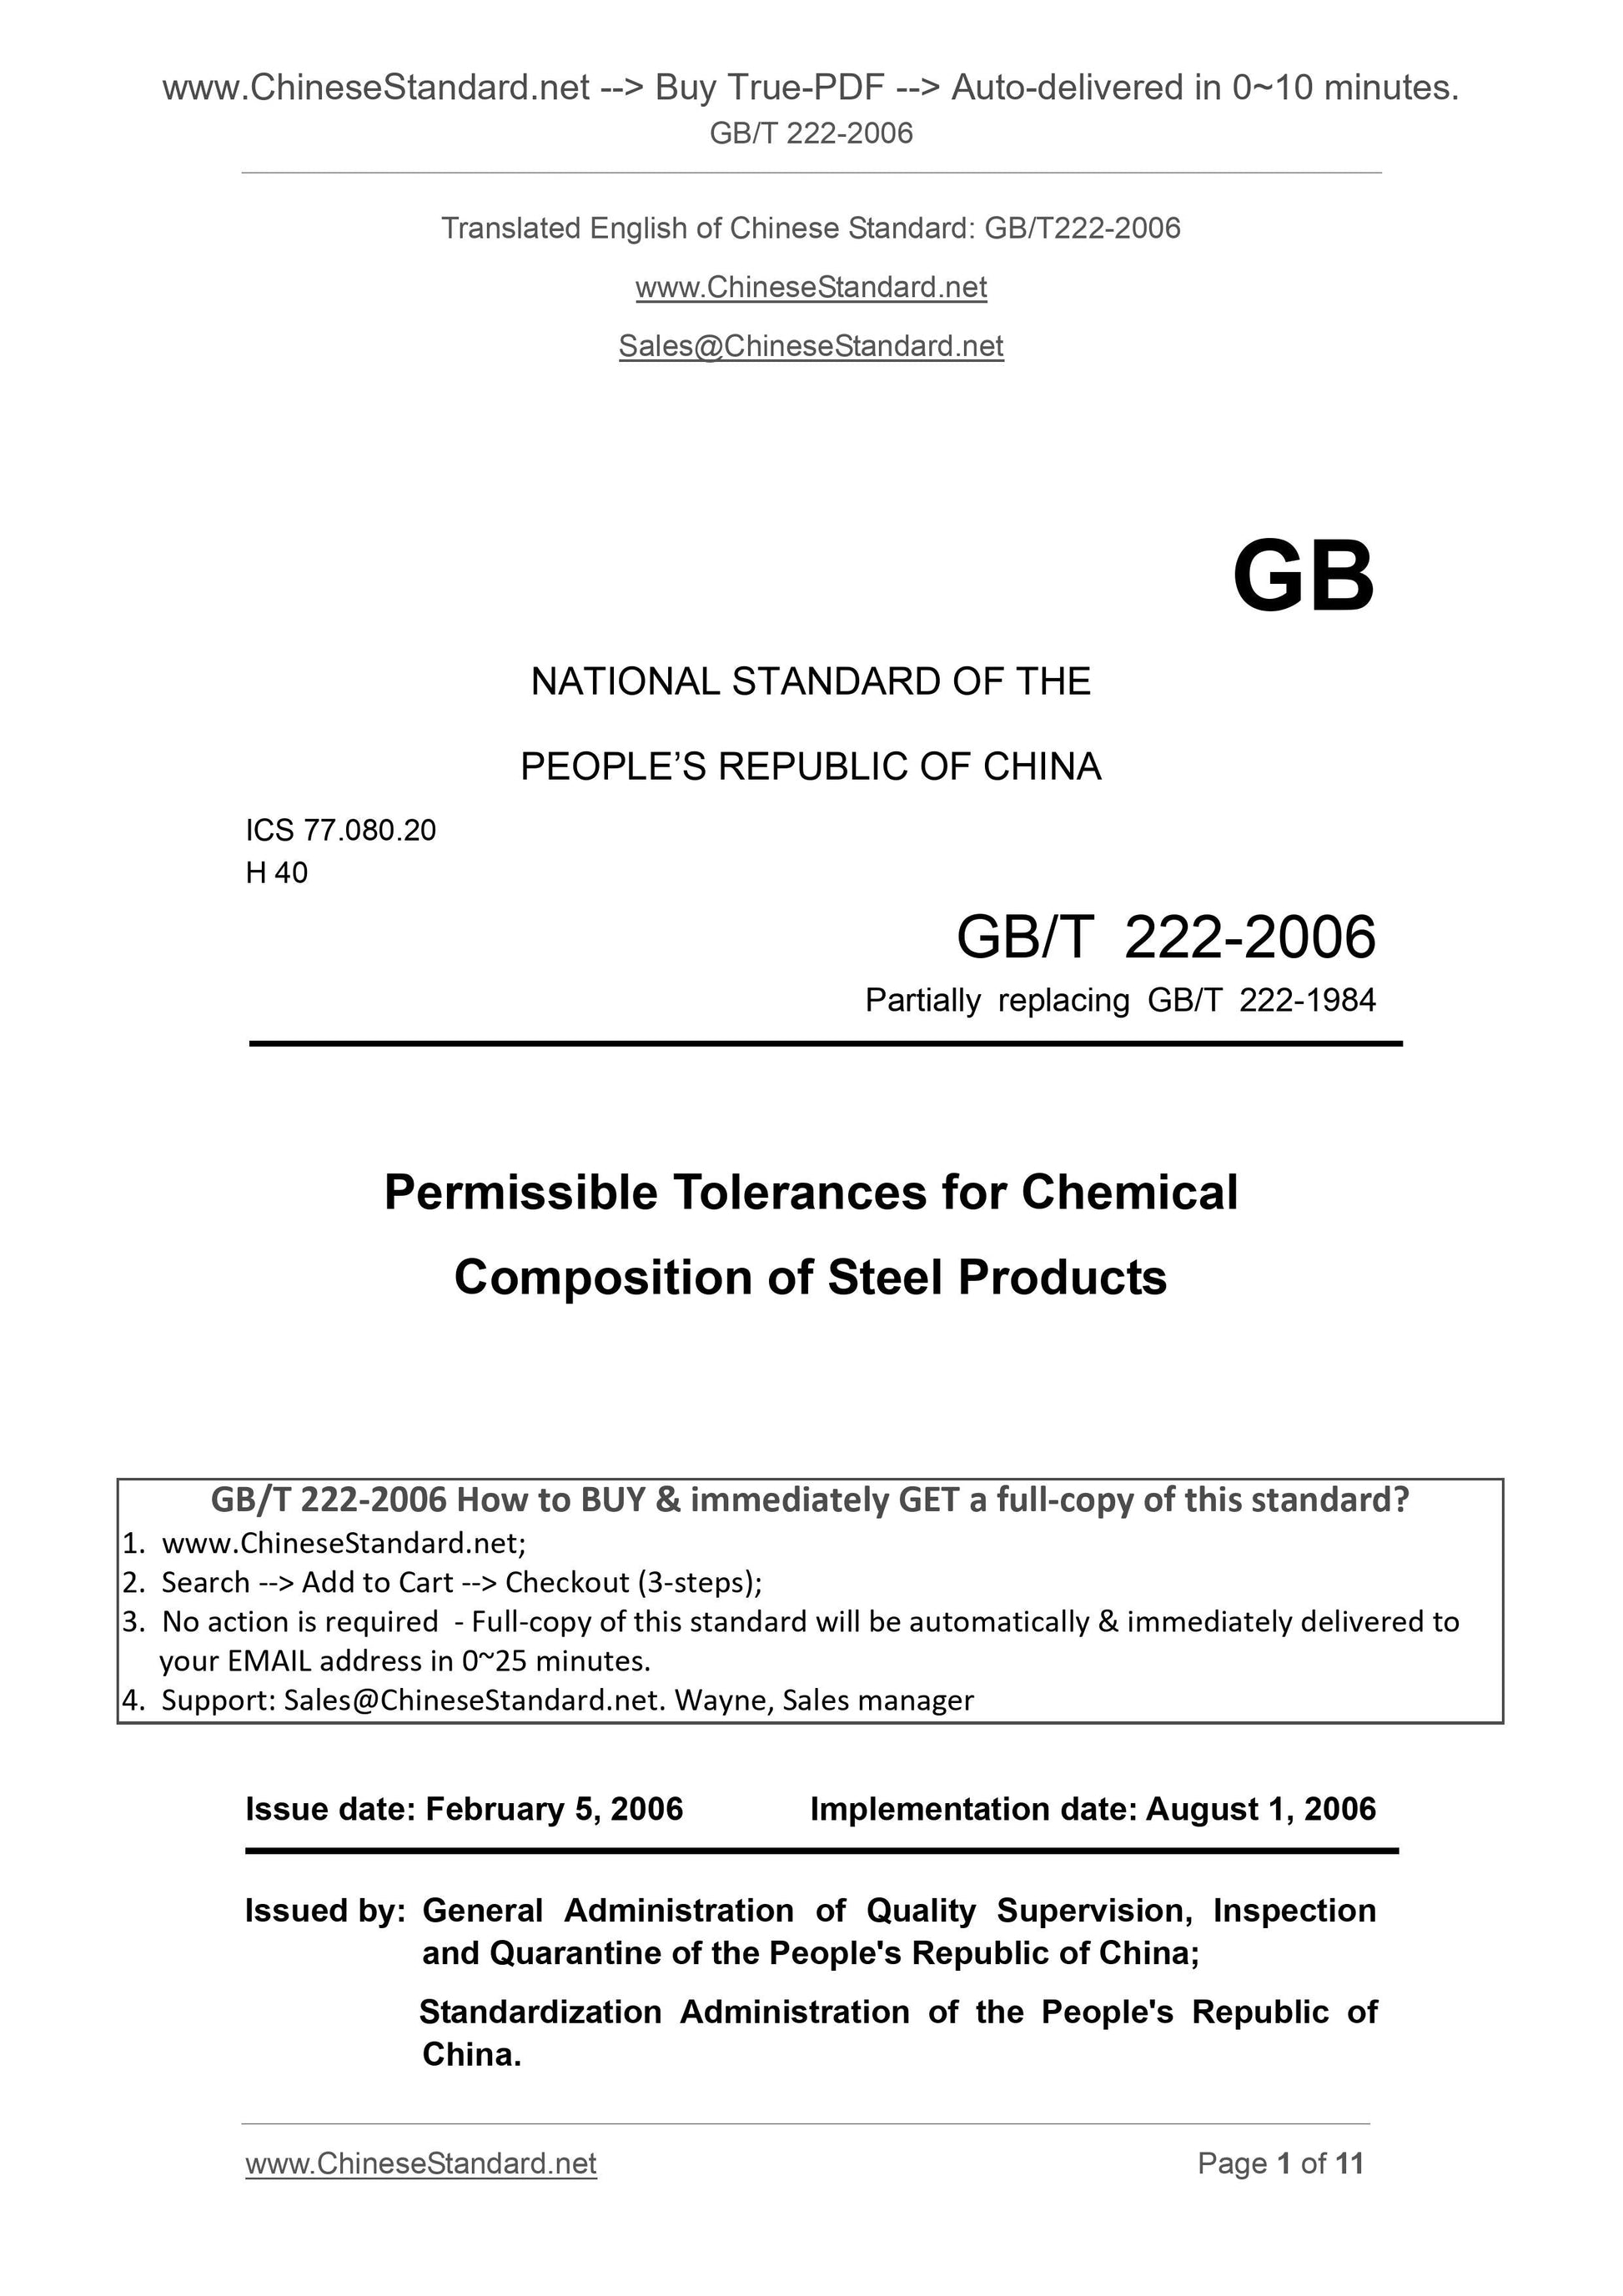 GB/T 222-2006 Page 1